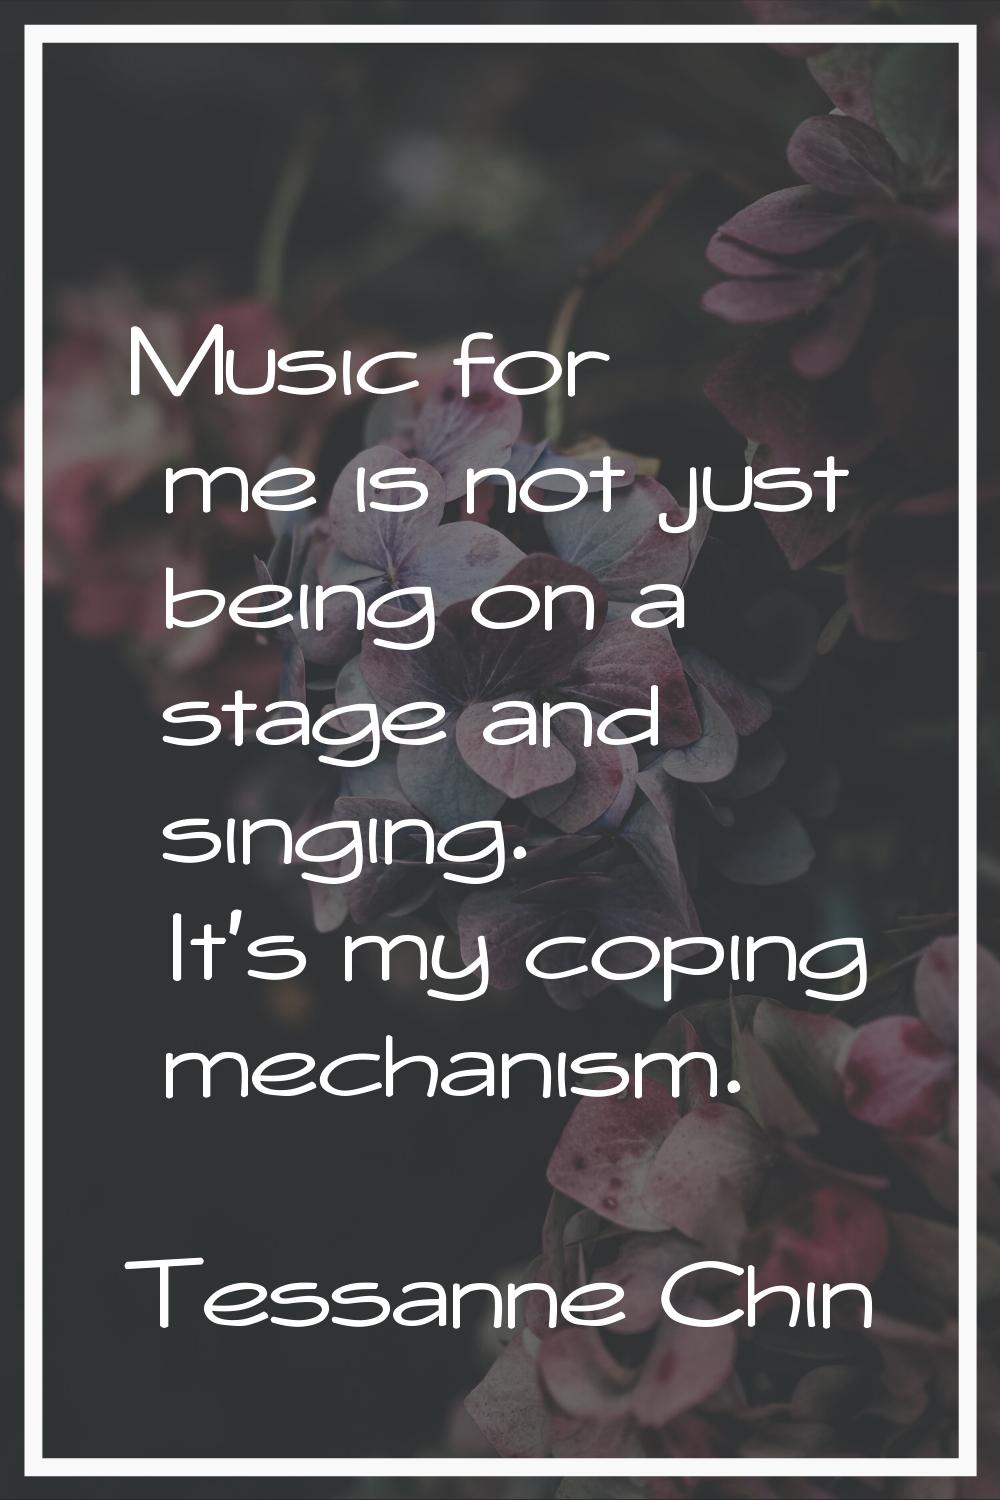 Music for me is not just being on a stage and singing. It's my coping mechanism.